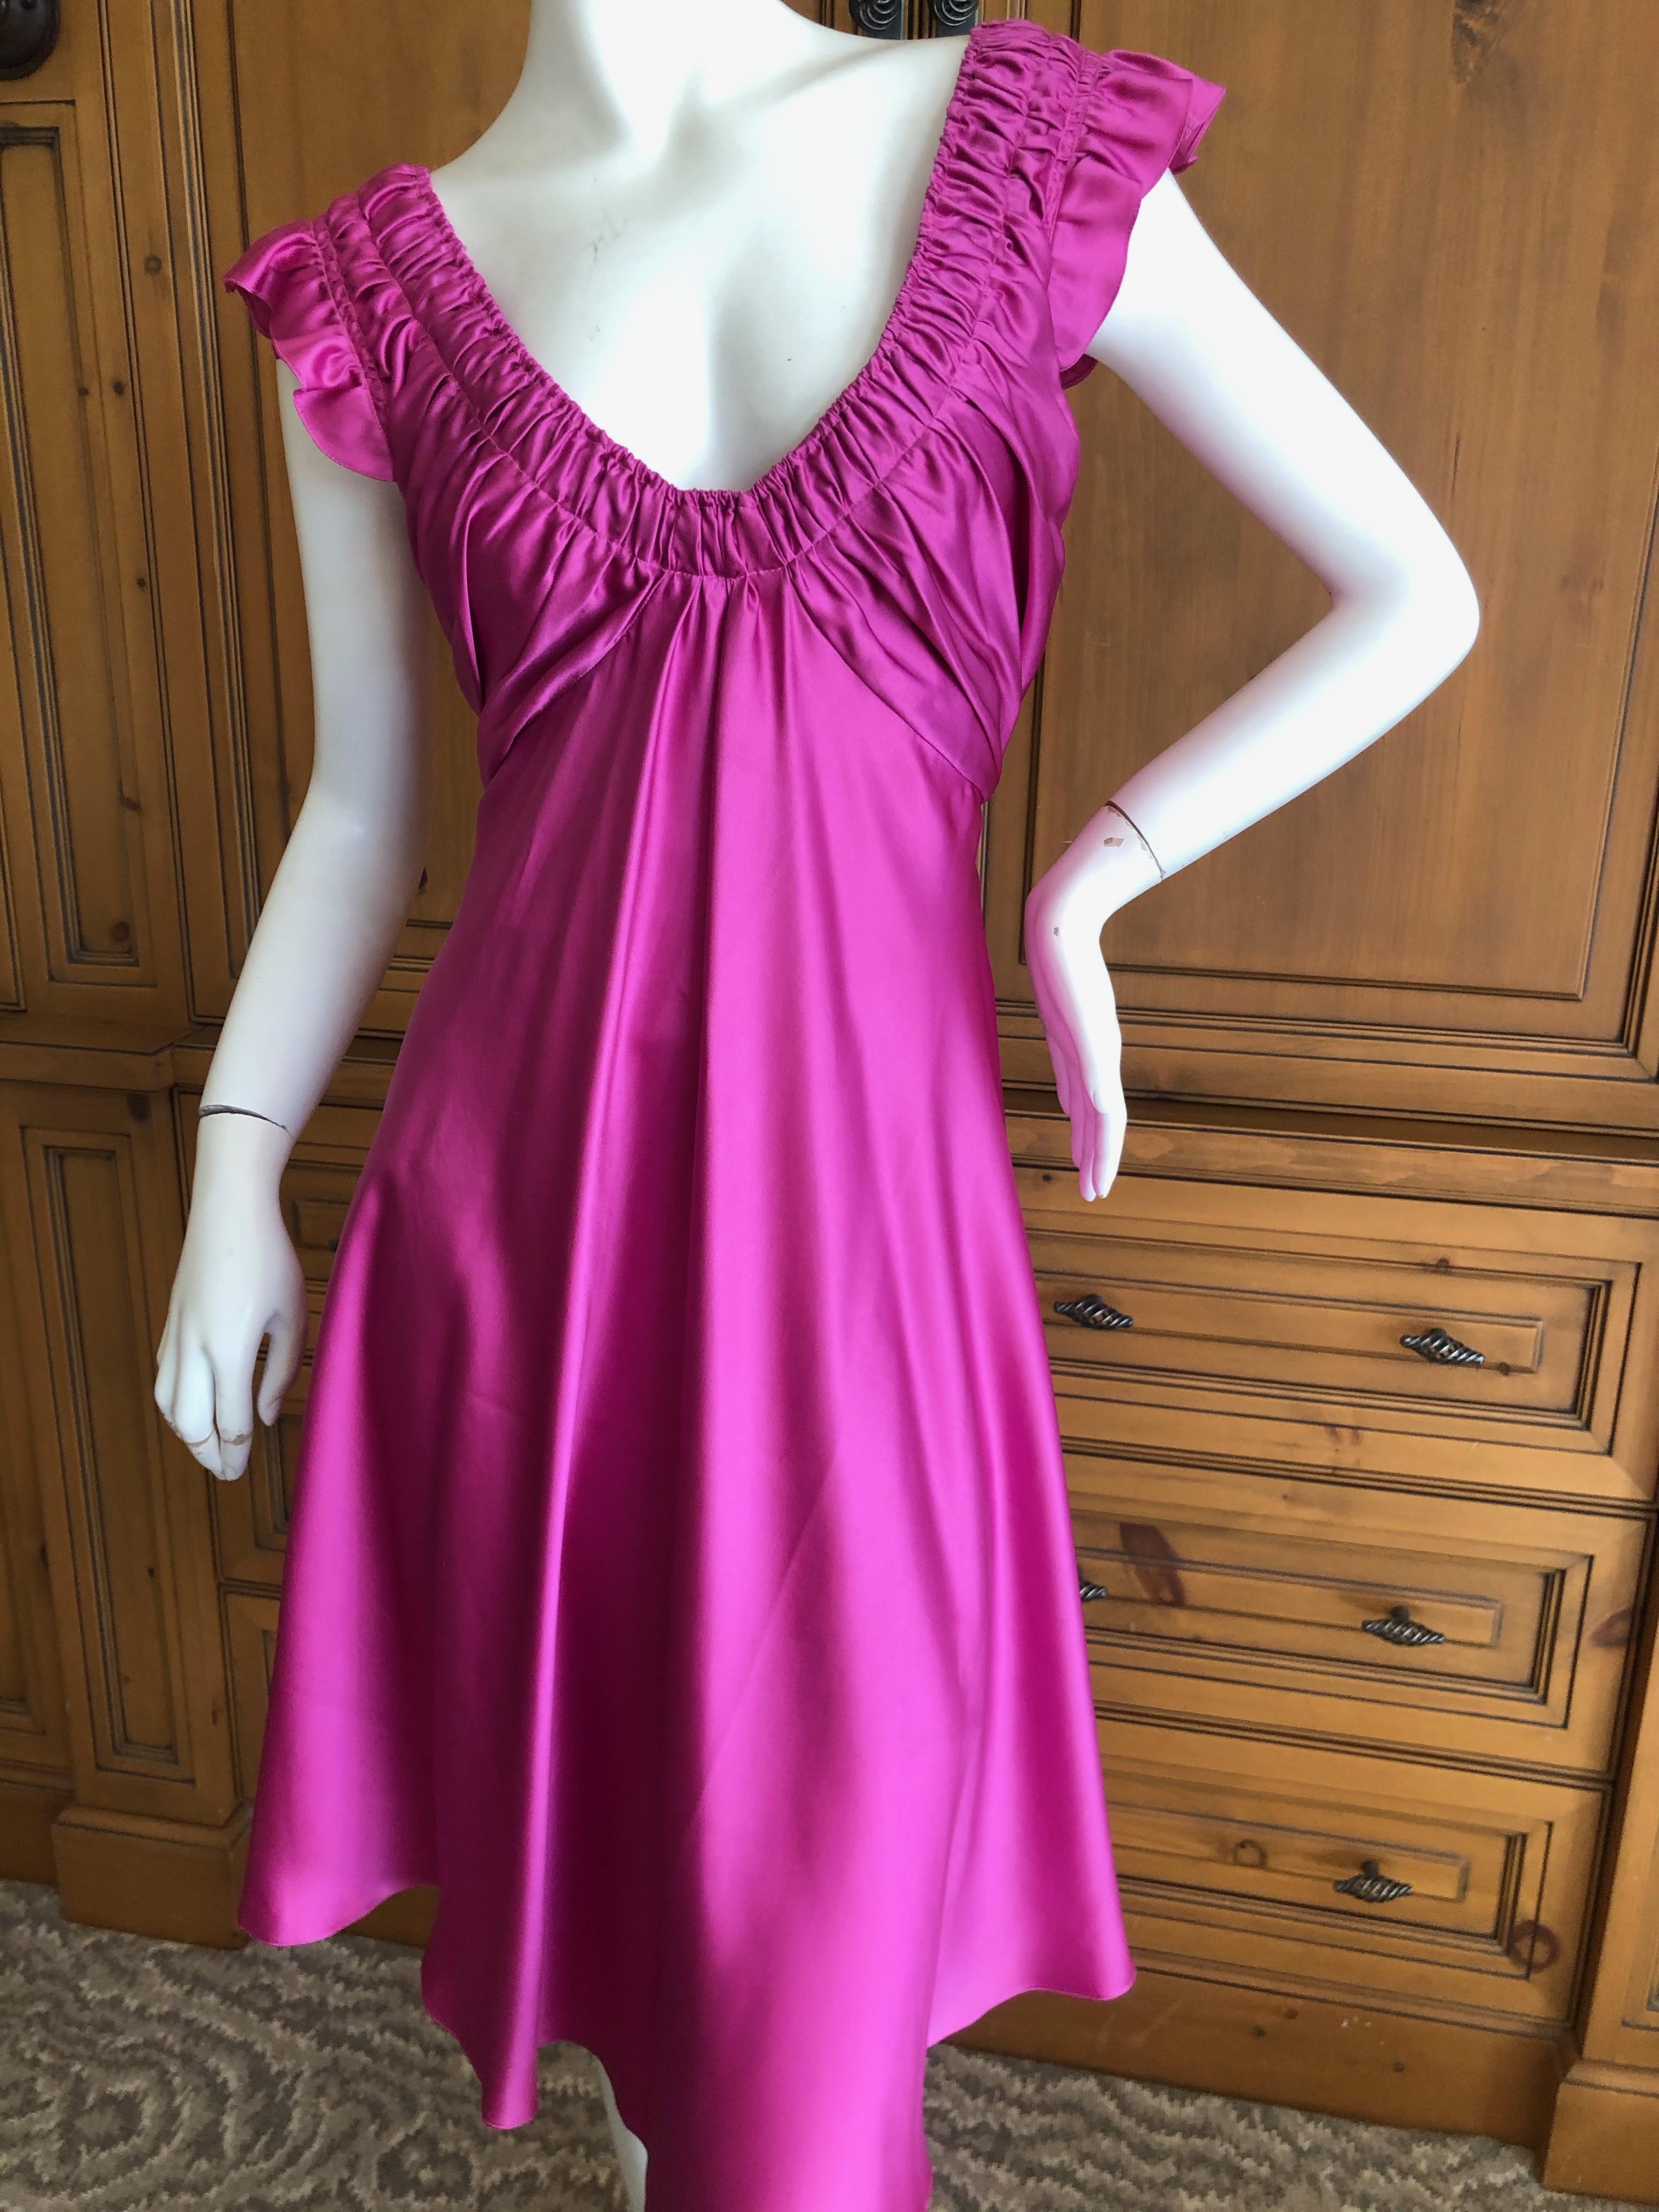   John Galliano Vintage Pink Low Cut Dress with Gathered Details.
So Sweet
Size 40
Bust 38